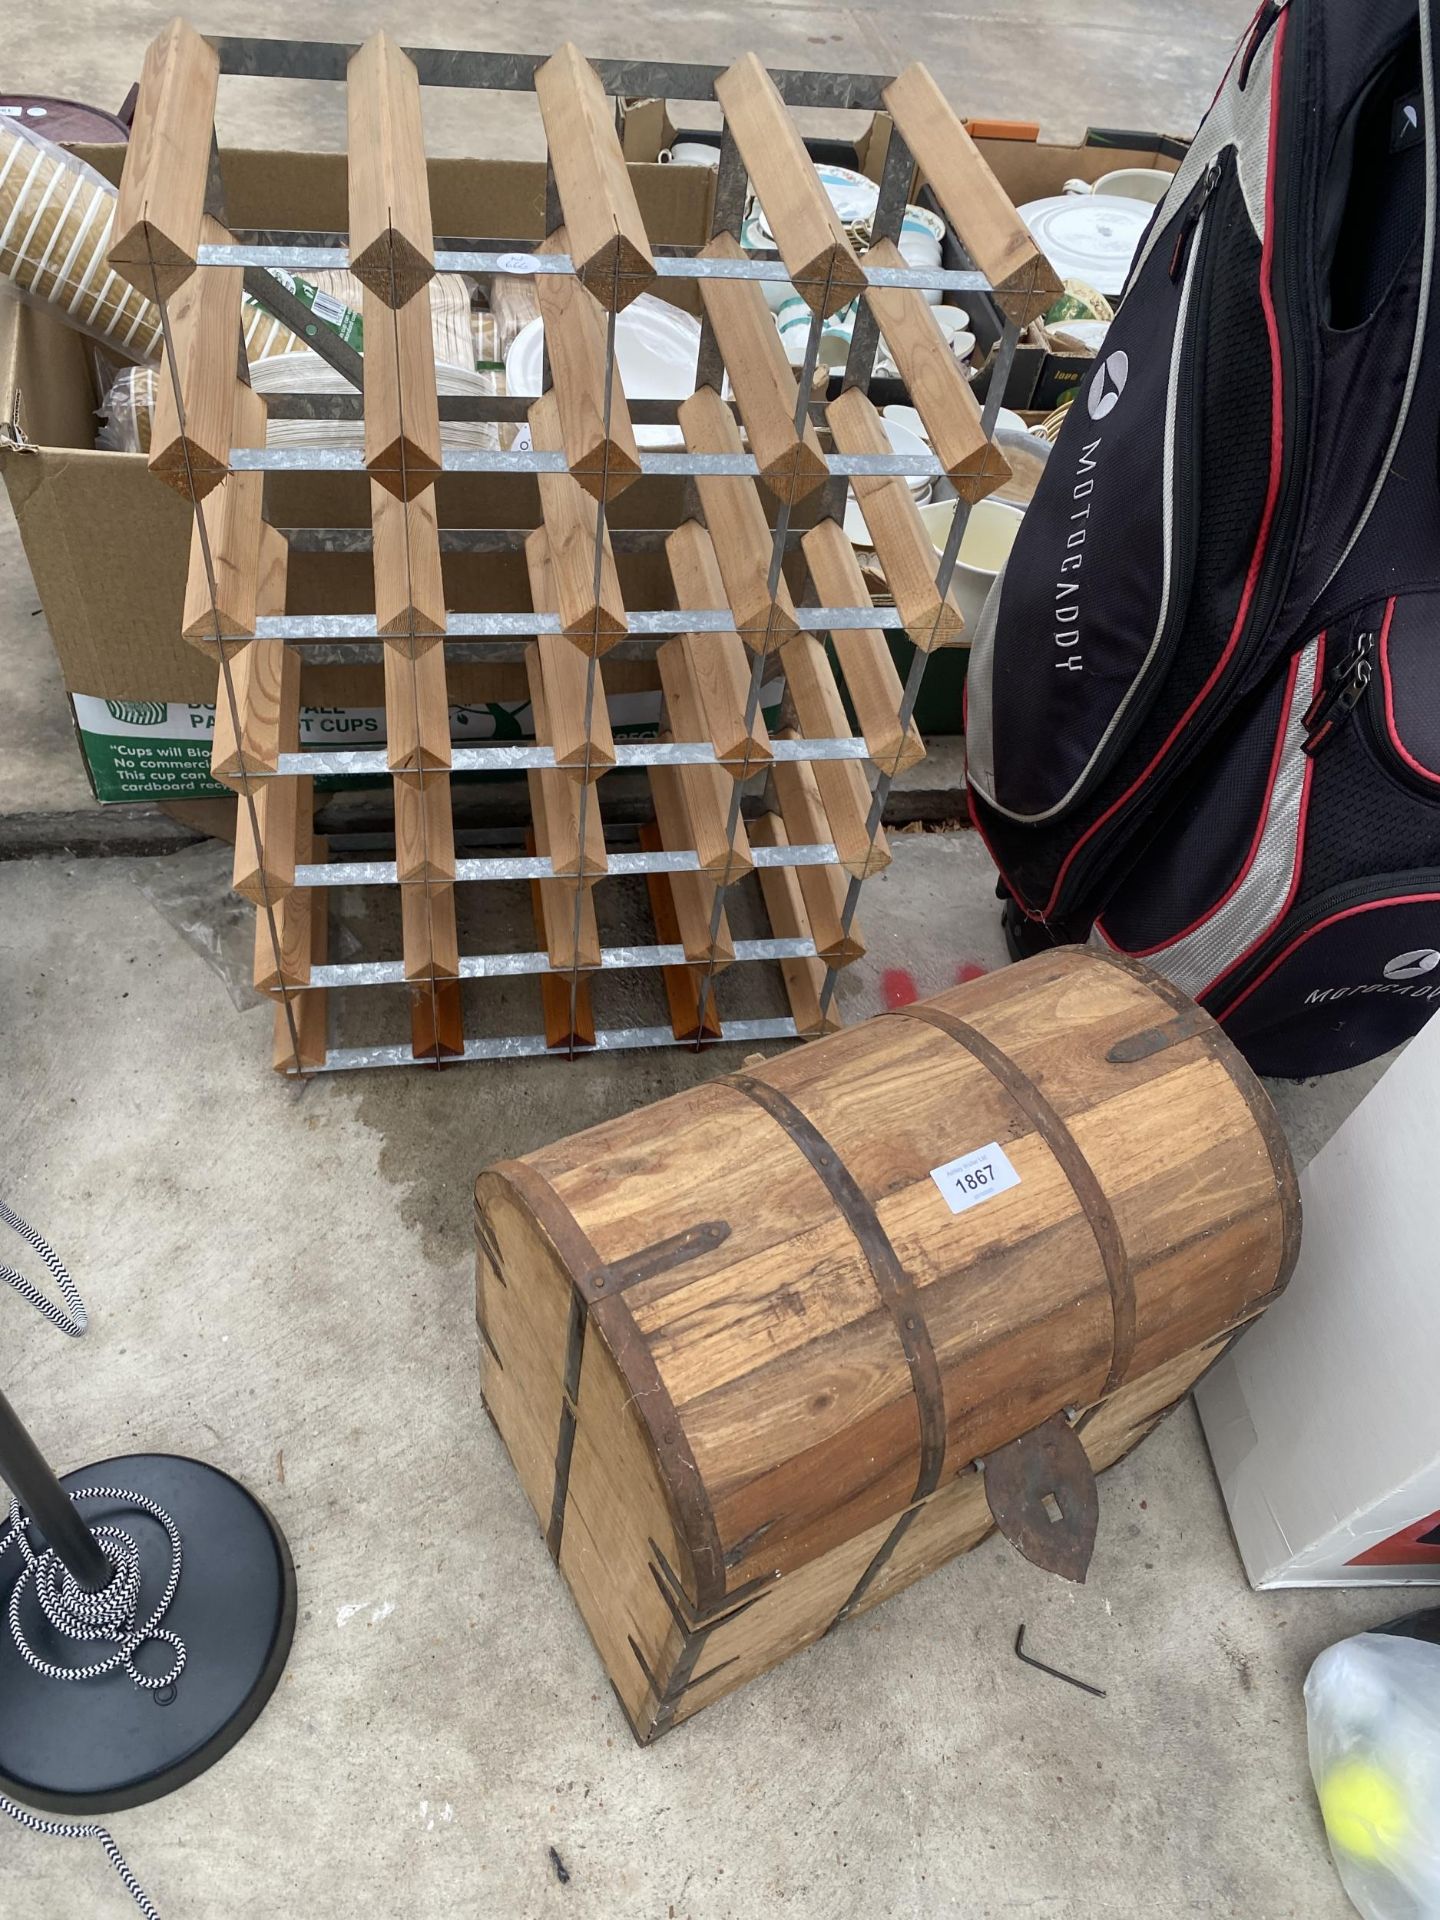 A RUSTIC HARDWOOD SIX BOTTLE WINE CRATE AND A 20 BOTTLE WOODEN AND METAL WINE RACK